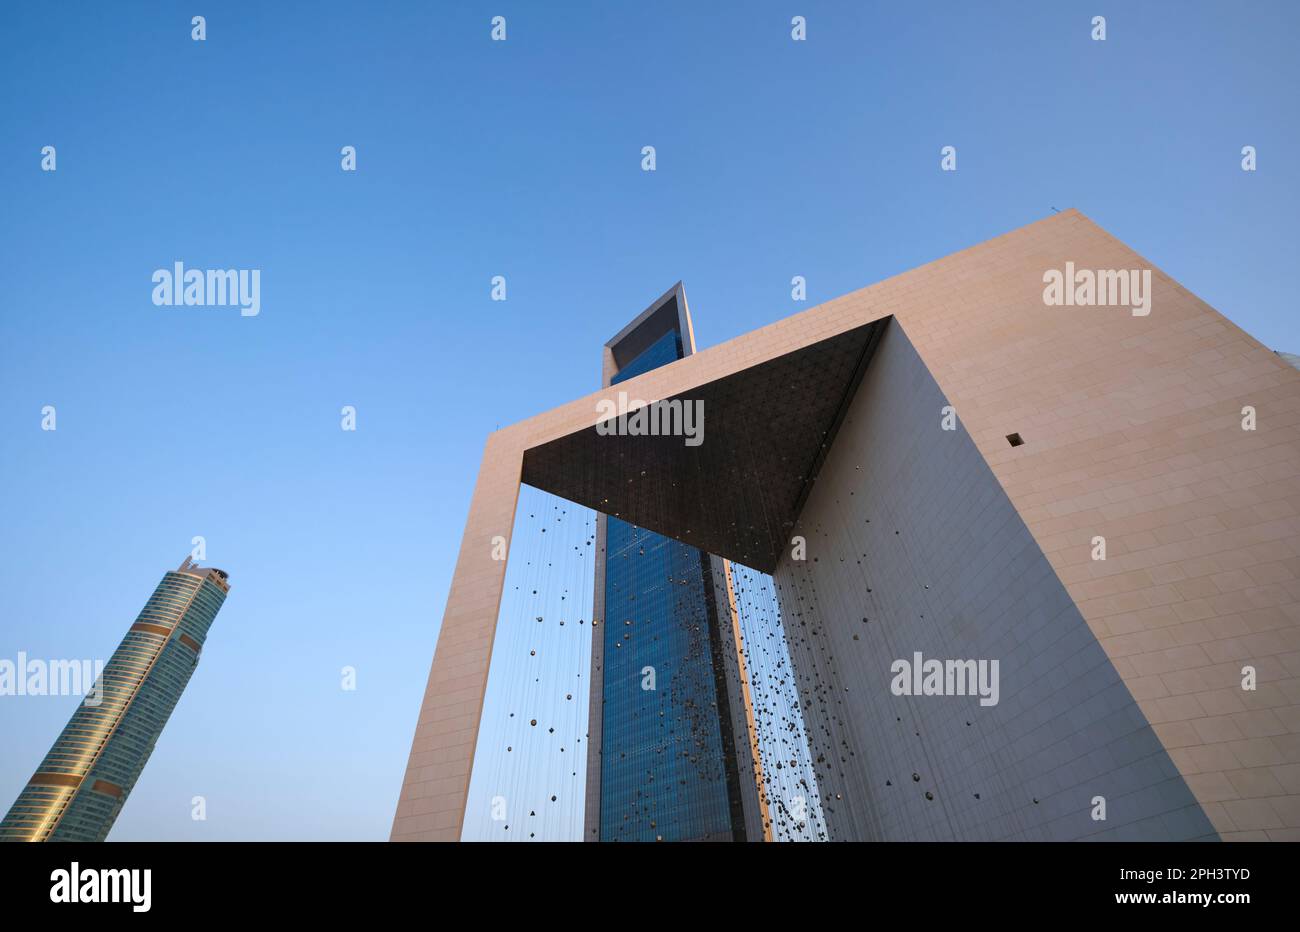 View of the Founder's Memorial, monument, dedicated to Sheikh Zayed bin Sultan. The ADNOC headquarters tower in the background. In Abu Dhabi, UAE, Uni Stock Photo